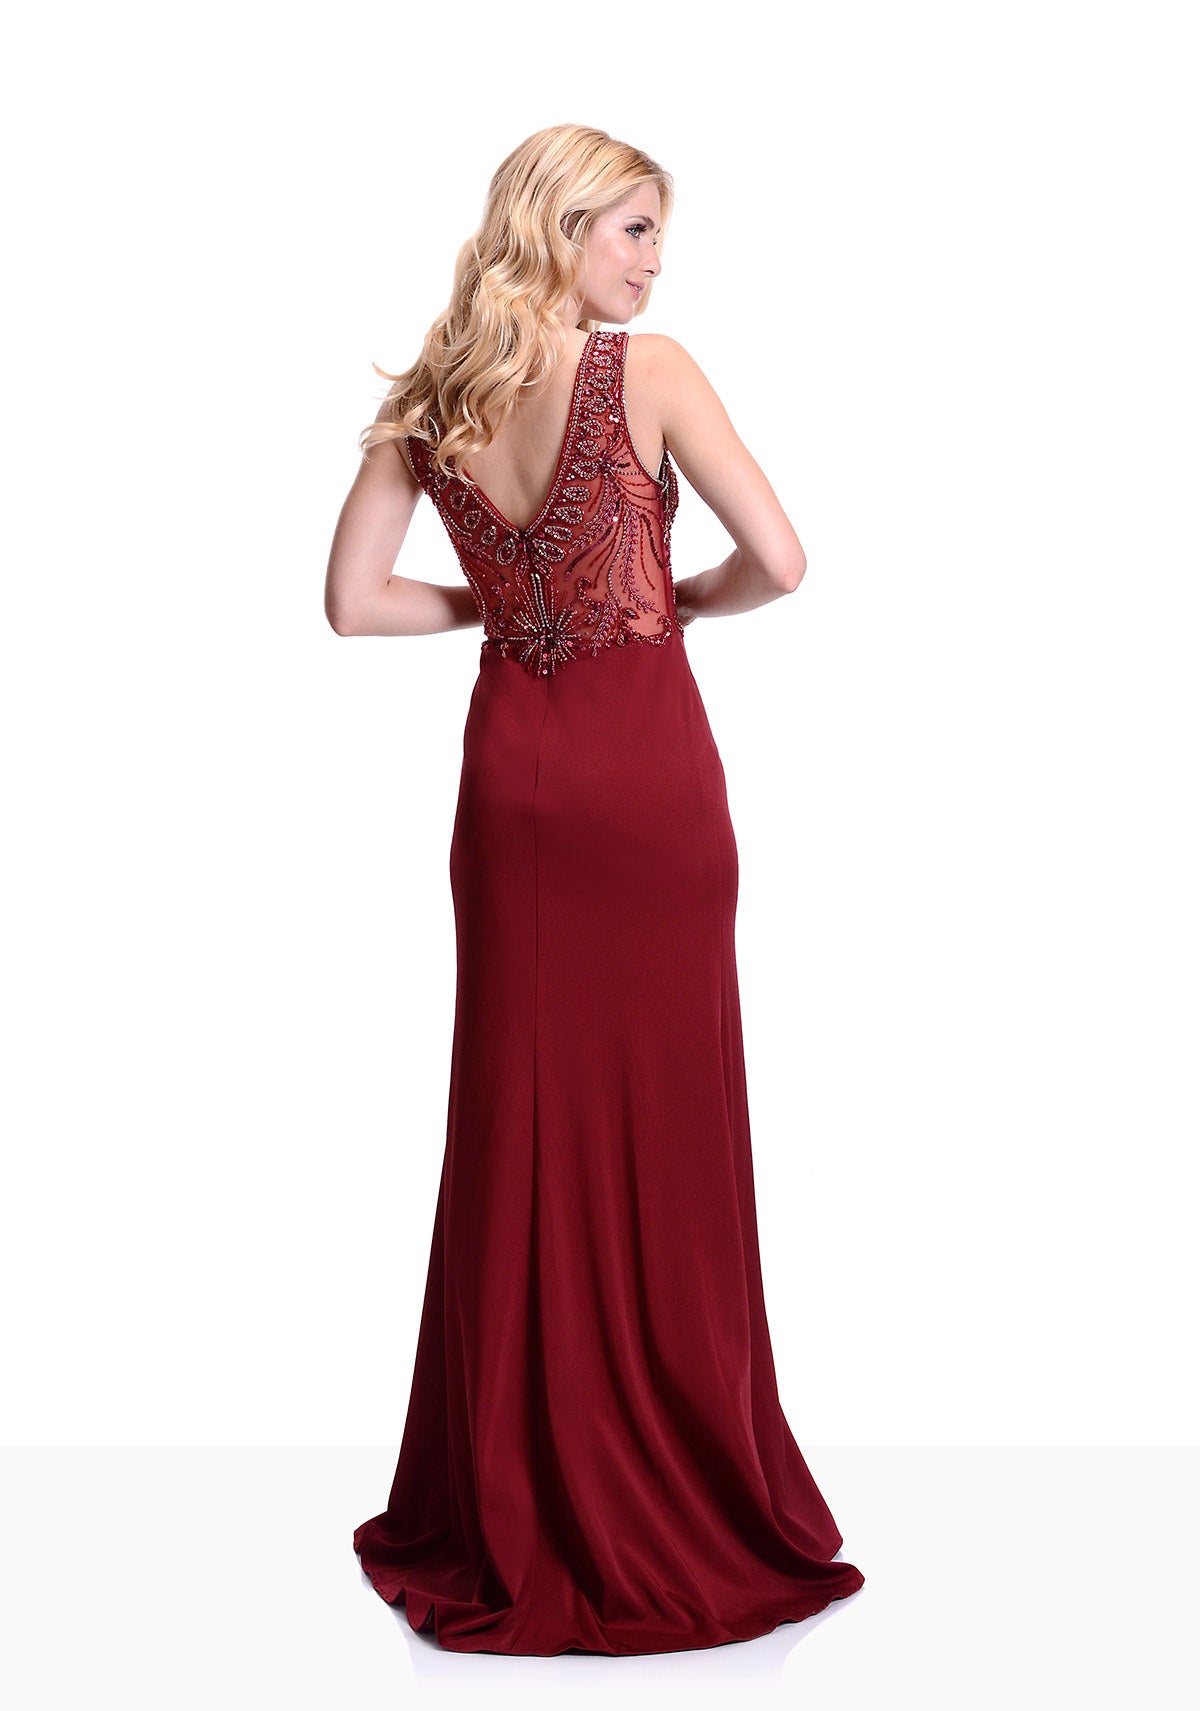 Elegant evening dress with embellished beaded bodice. V neckline design with sheer illusion bodice. Super pretty red fitted evening and prom dress.